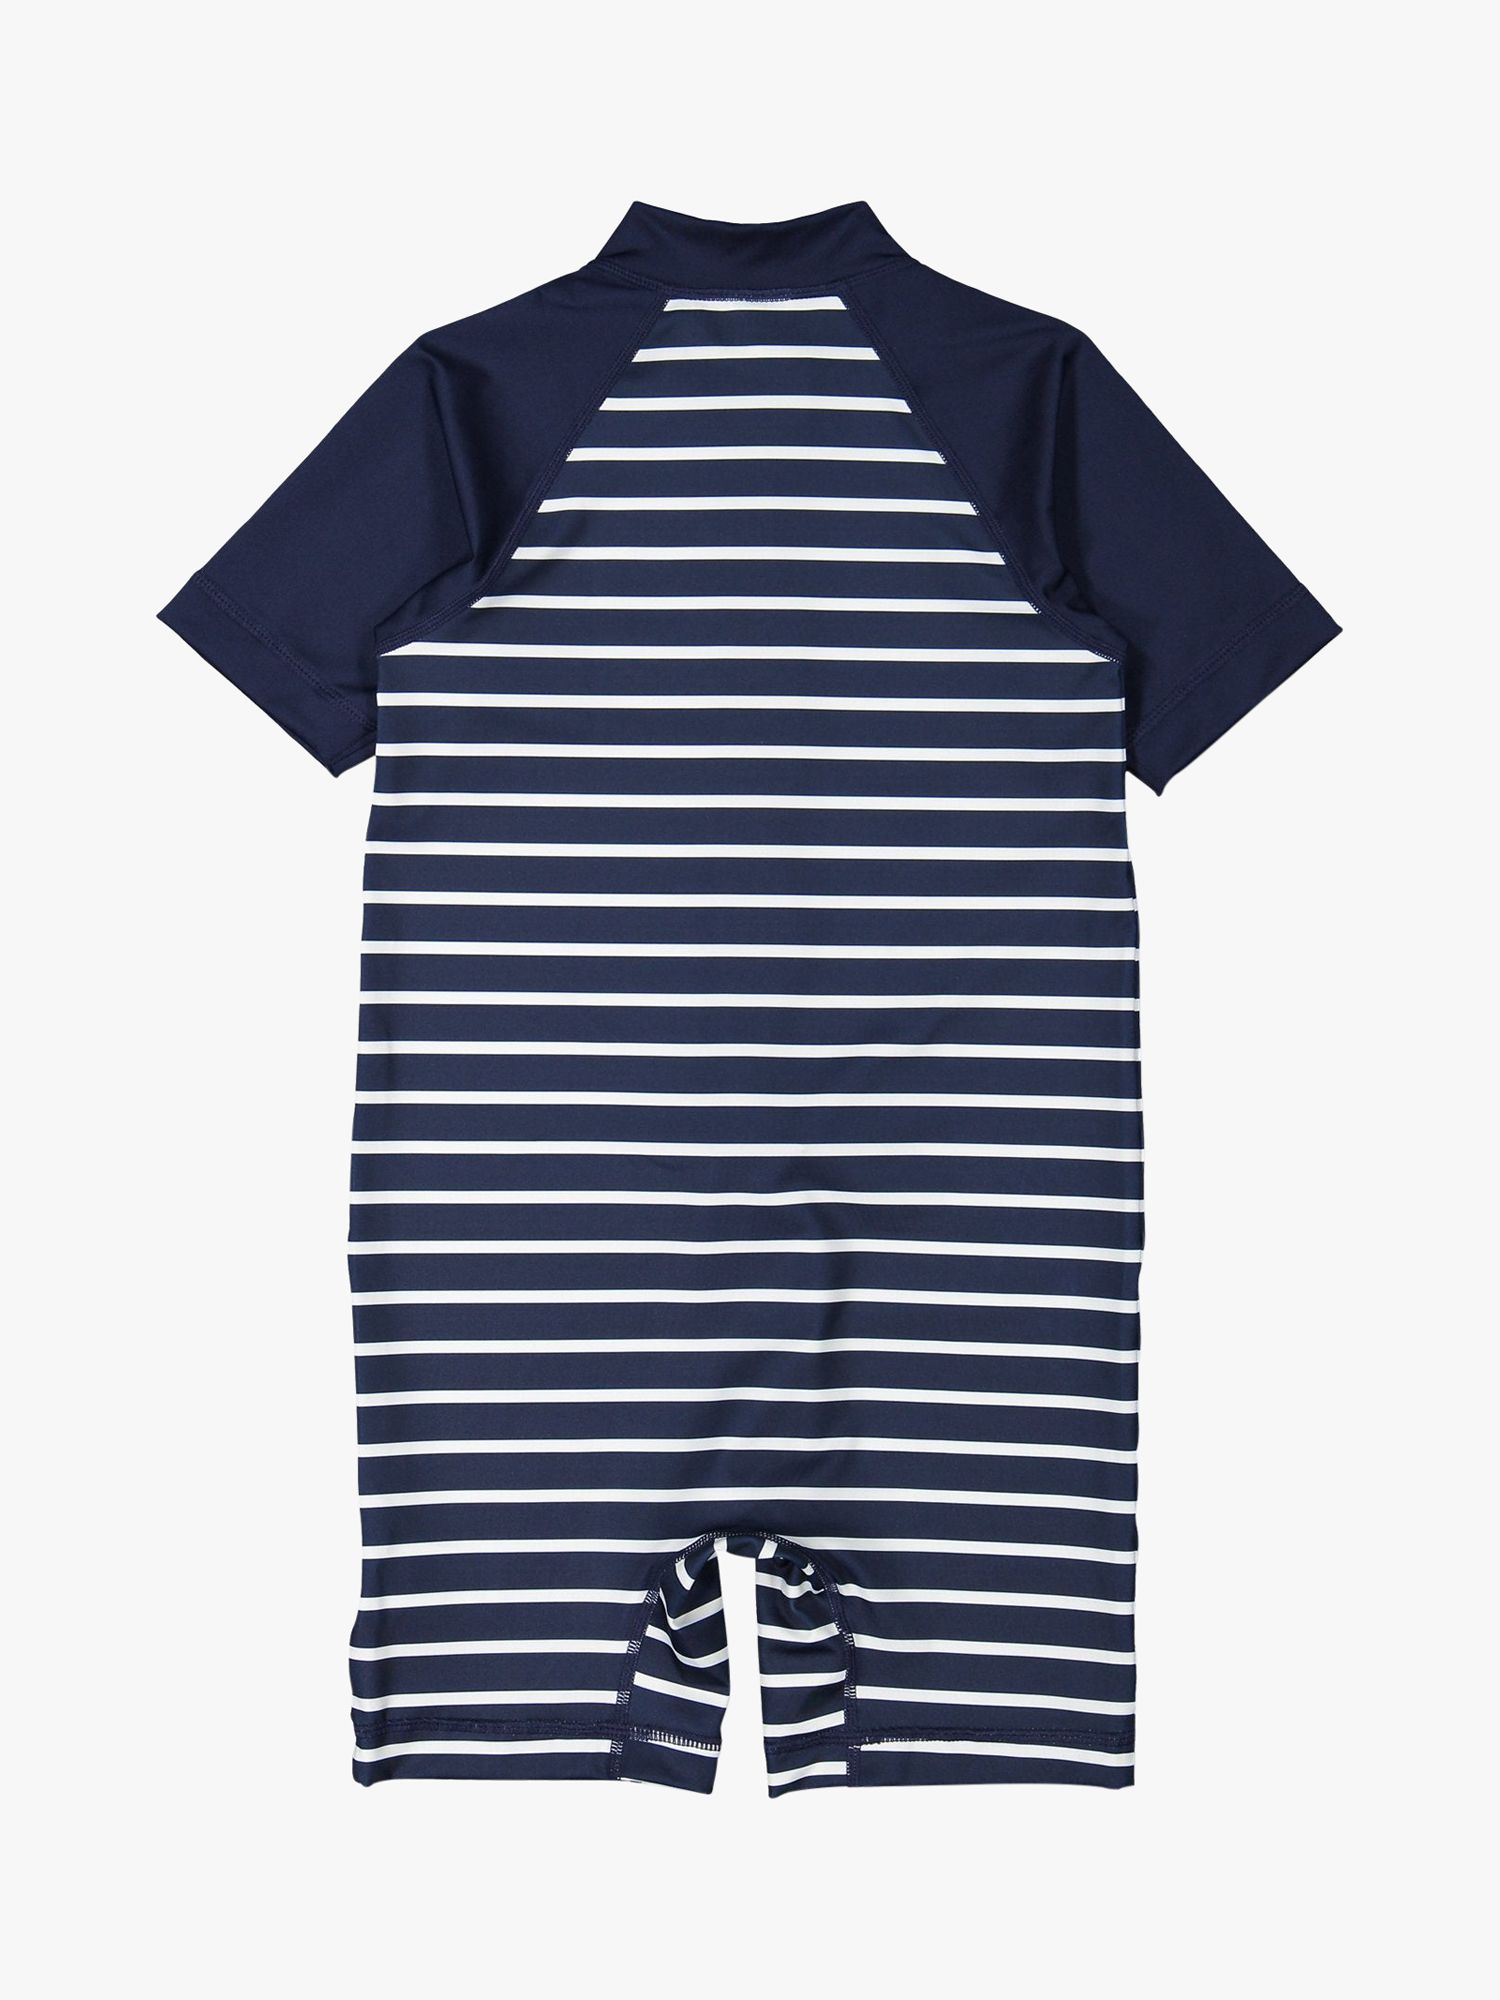 Polarn O. Pyret Kids' Stripe All-In-One Swimsuit, Navy, 6-12 months